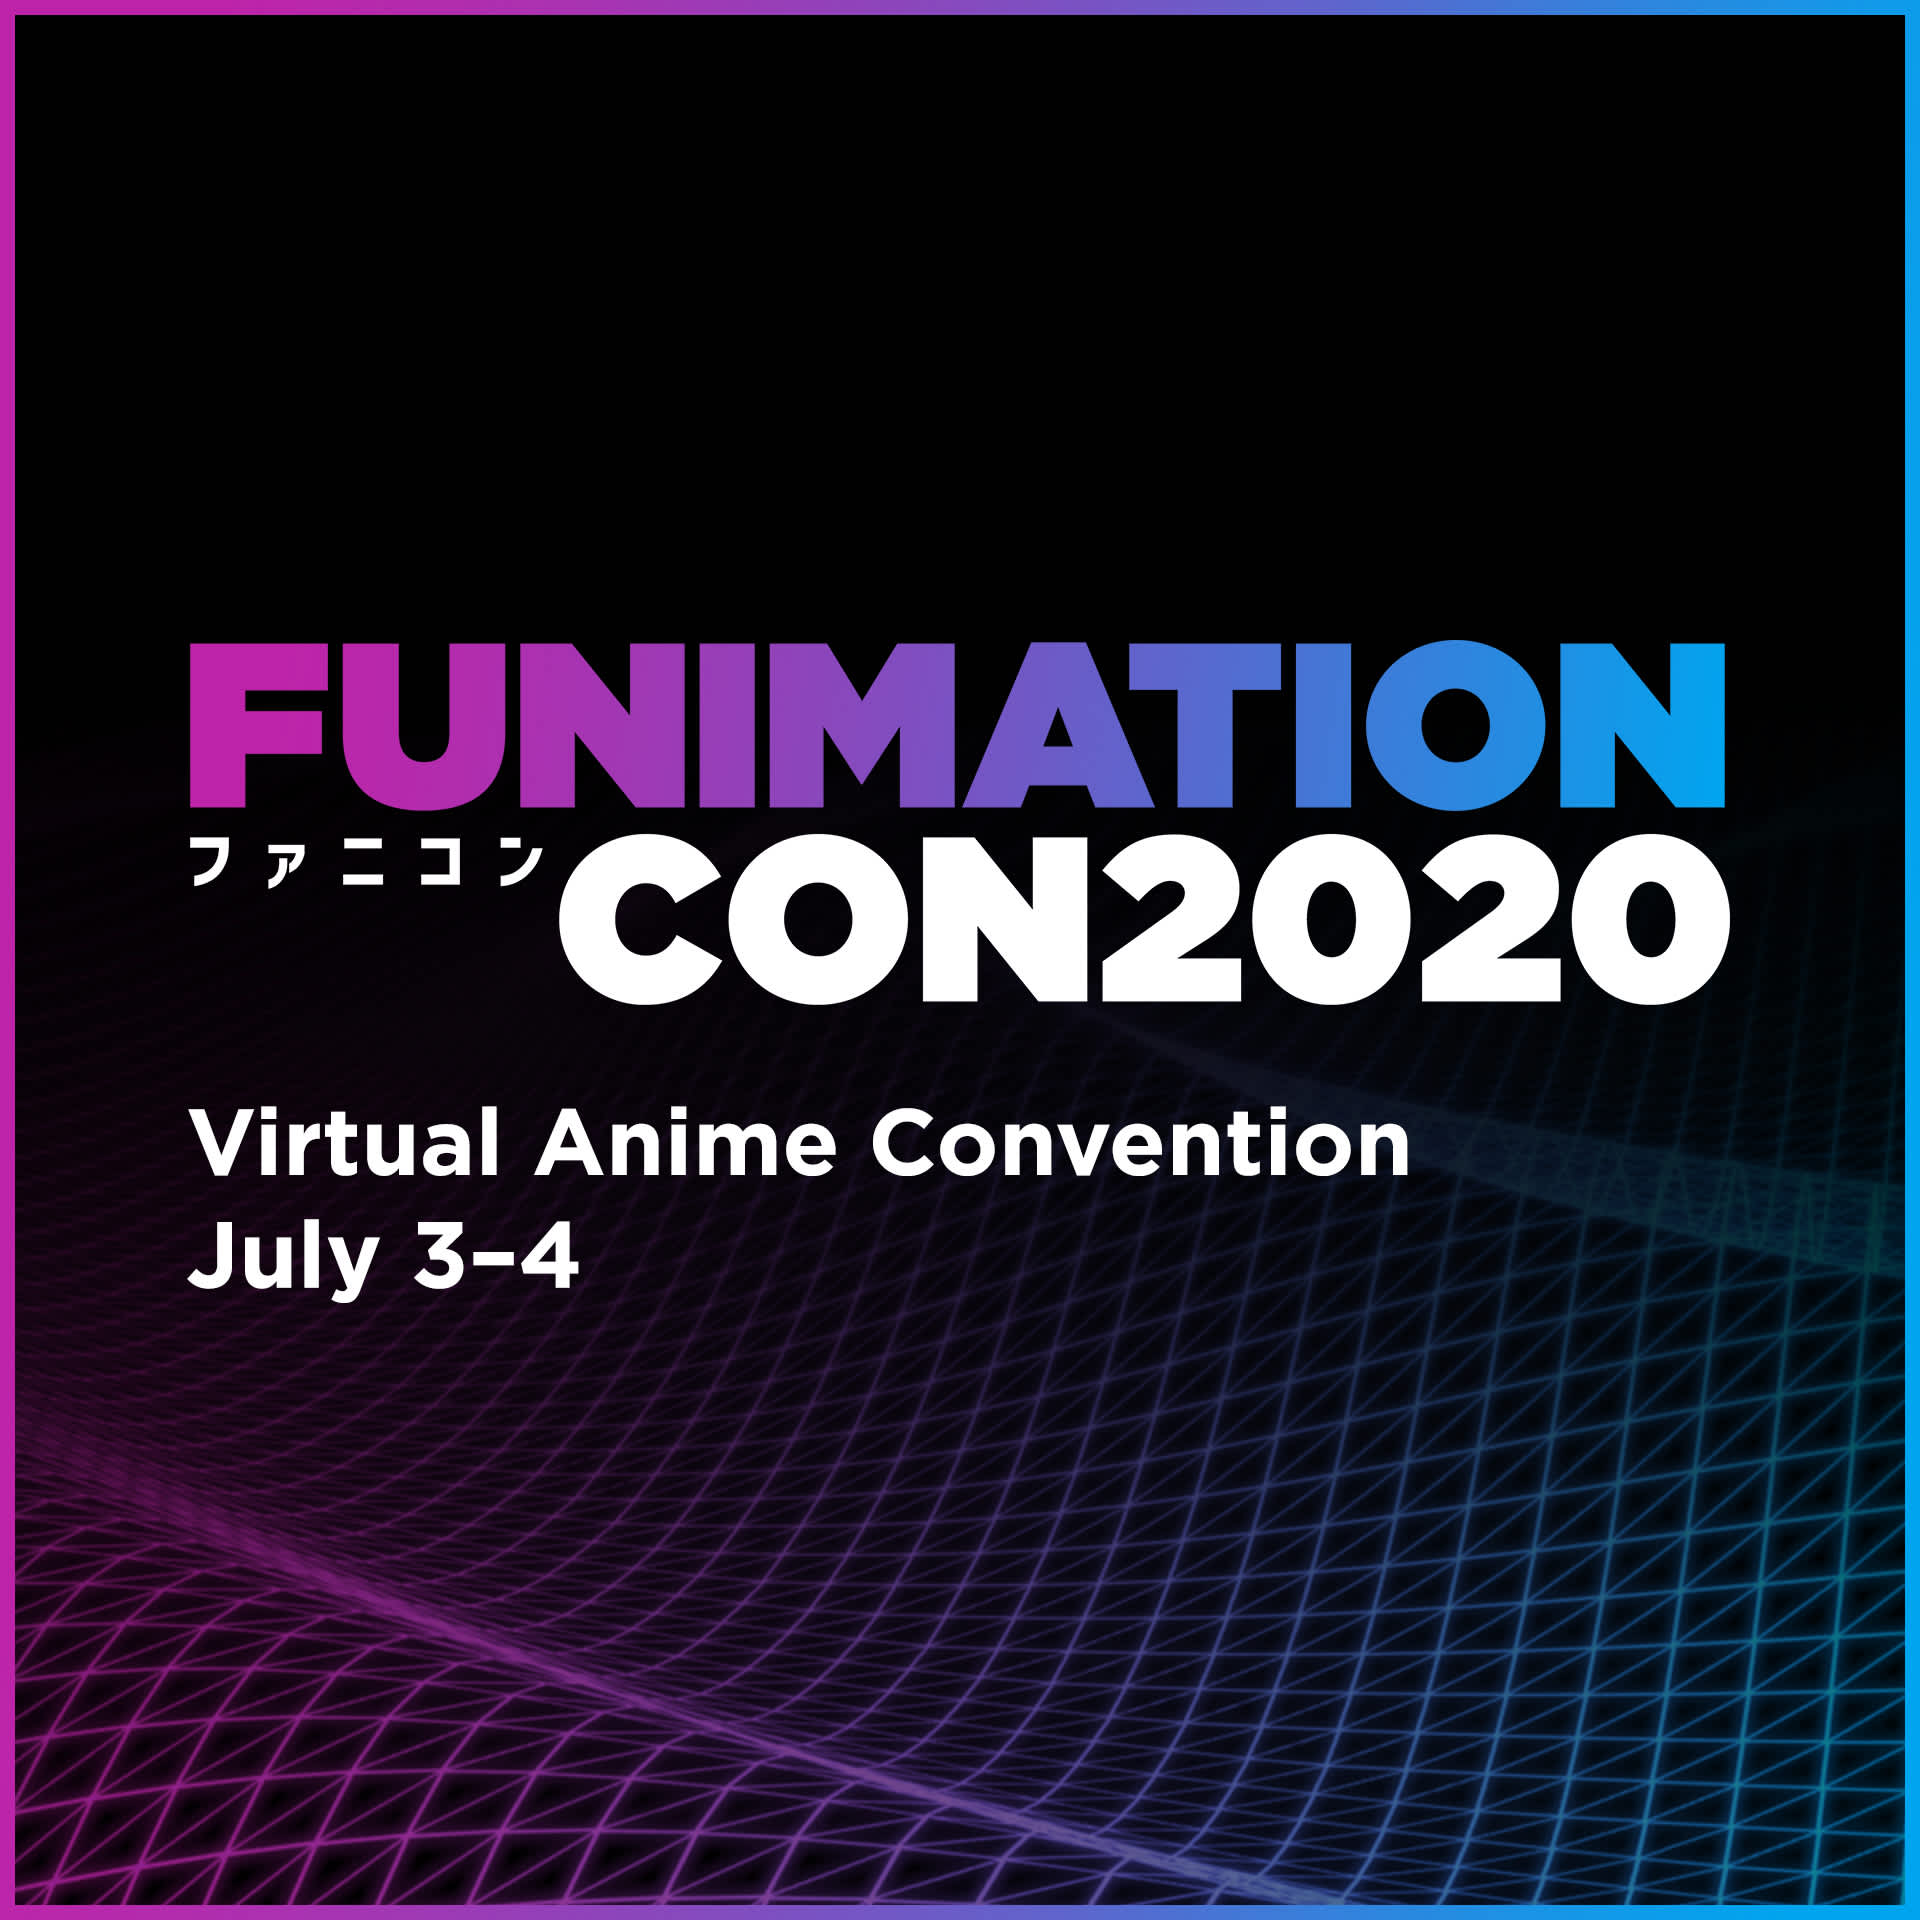 July 28 — Introducing IchigoCon: Ventura County's First Gaming and Anime  convention – Amigos805.com